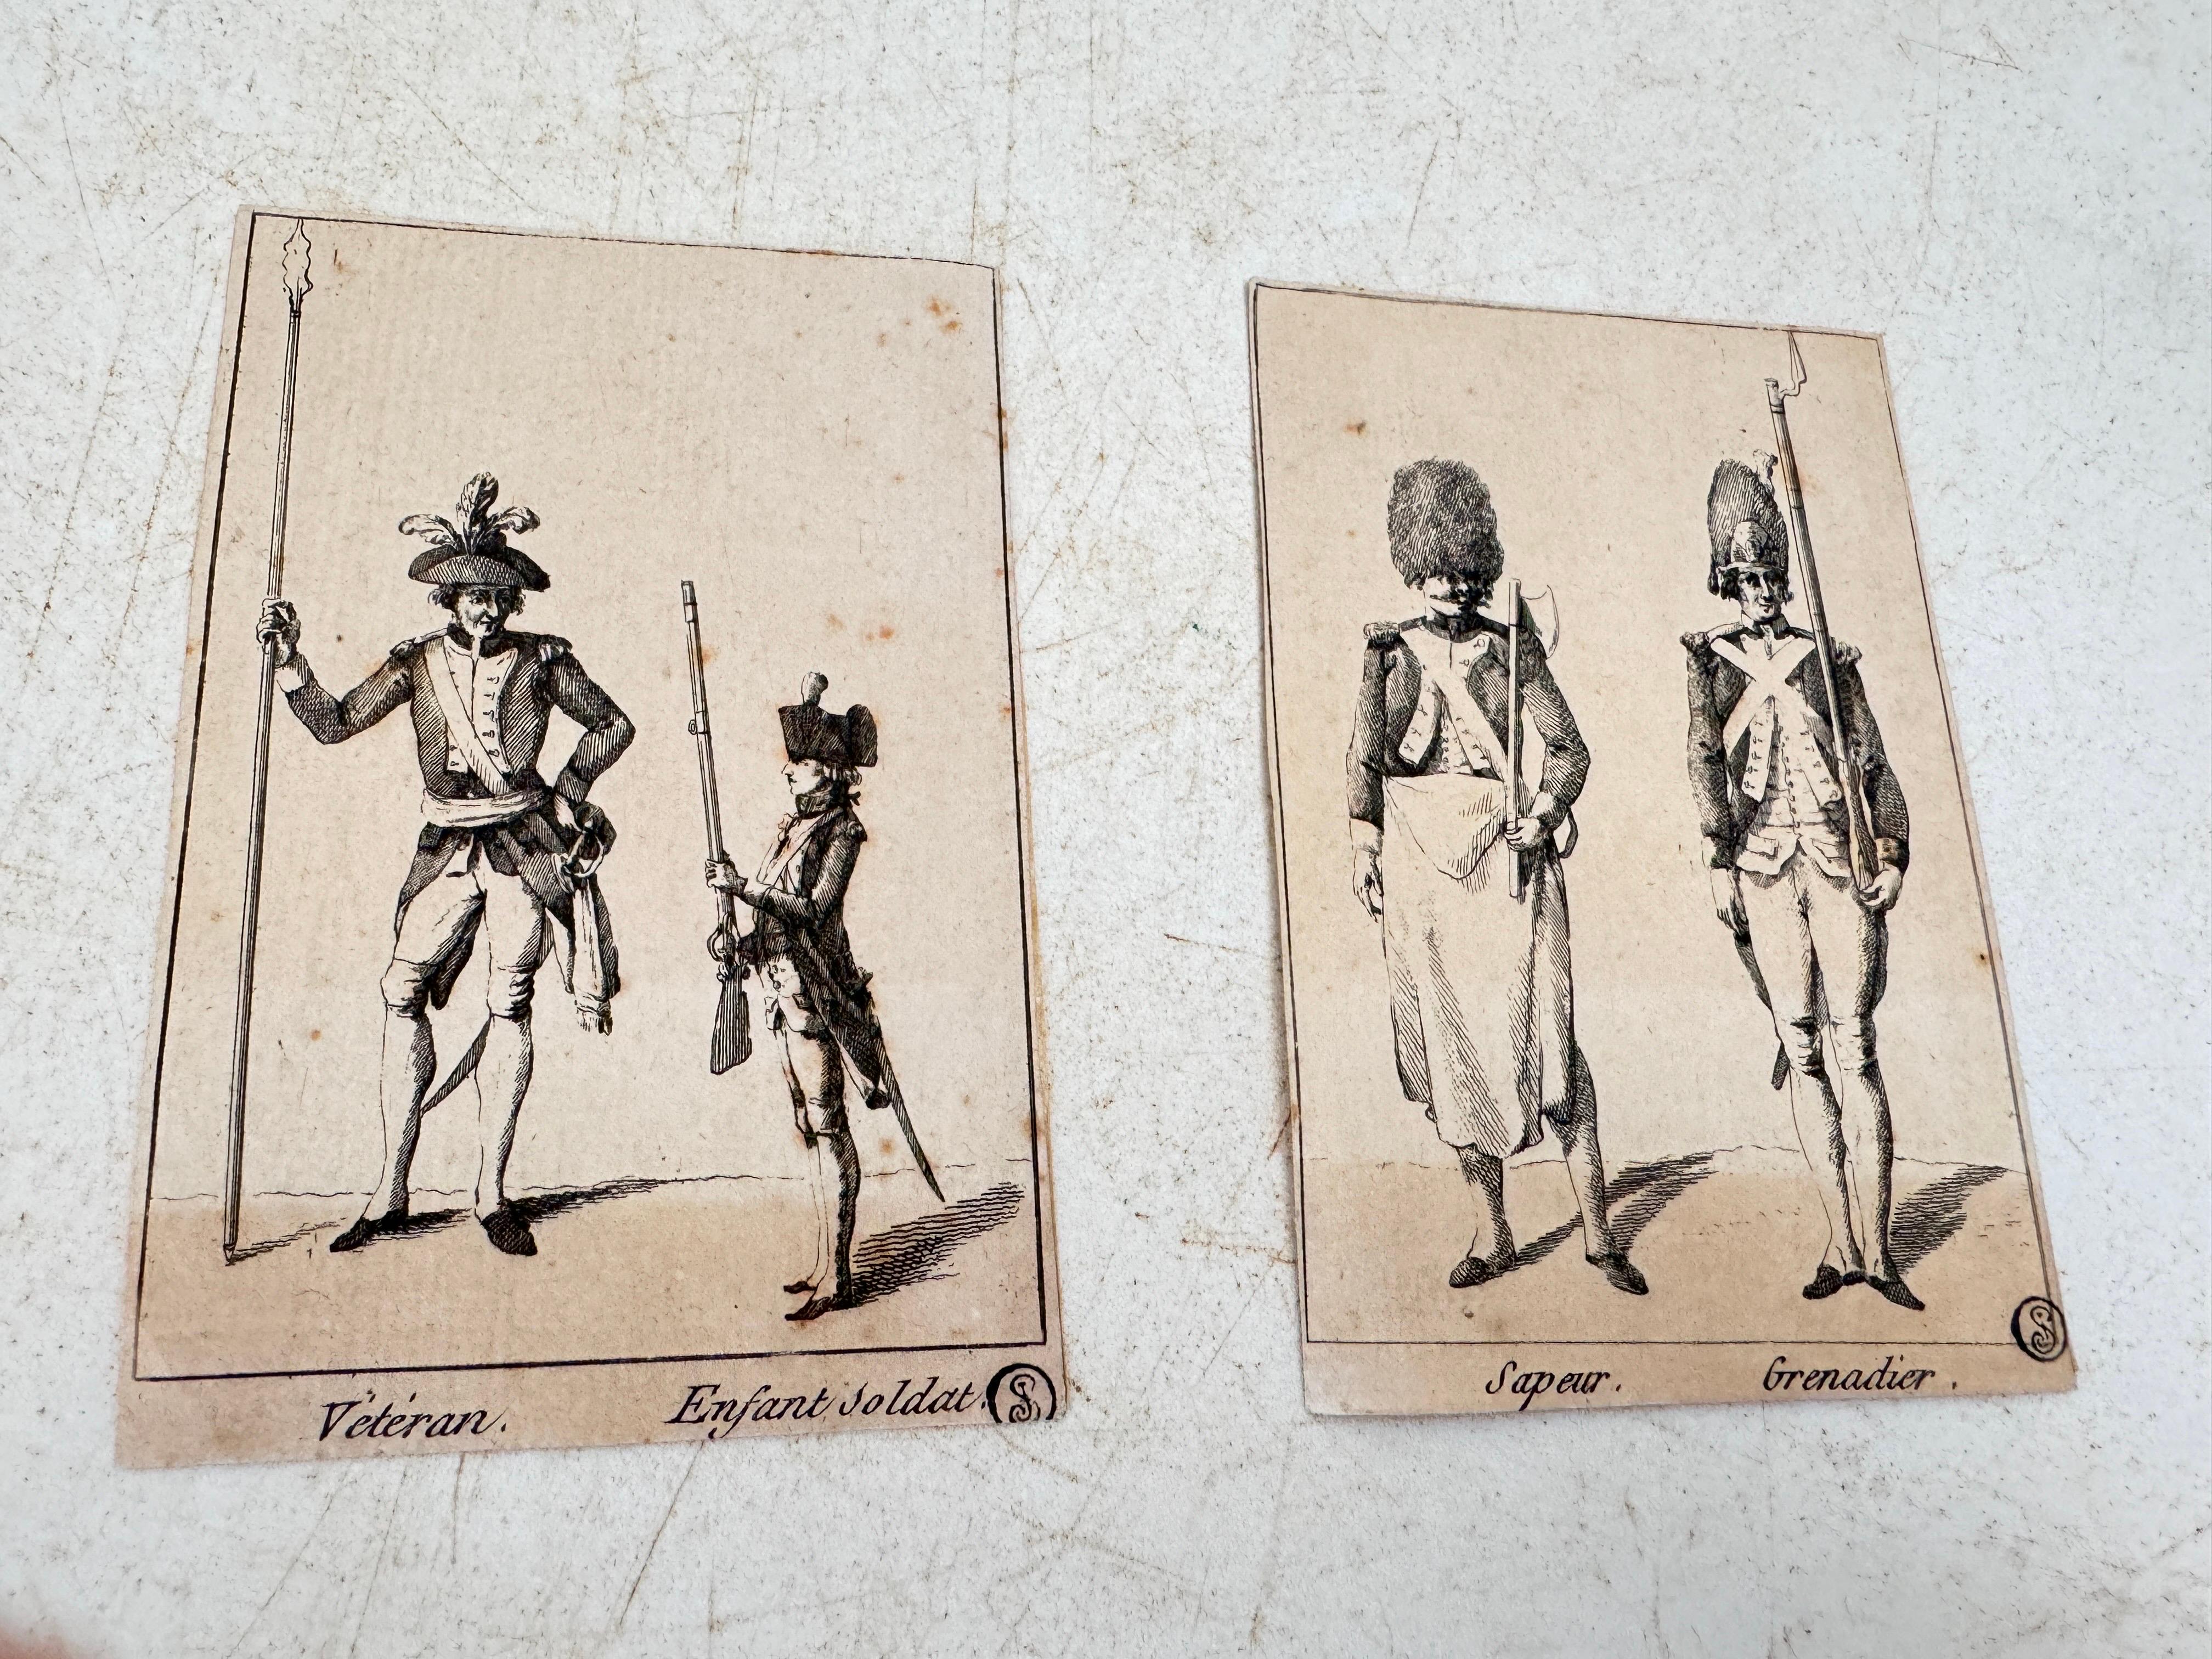 Paper Old Original Engraving  with soldiers characters  France 19th  For Sale